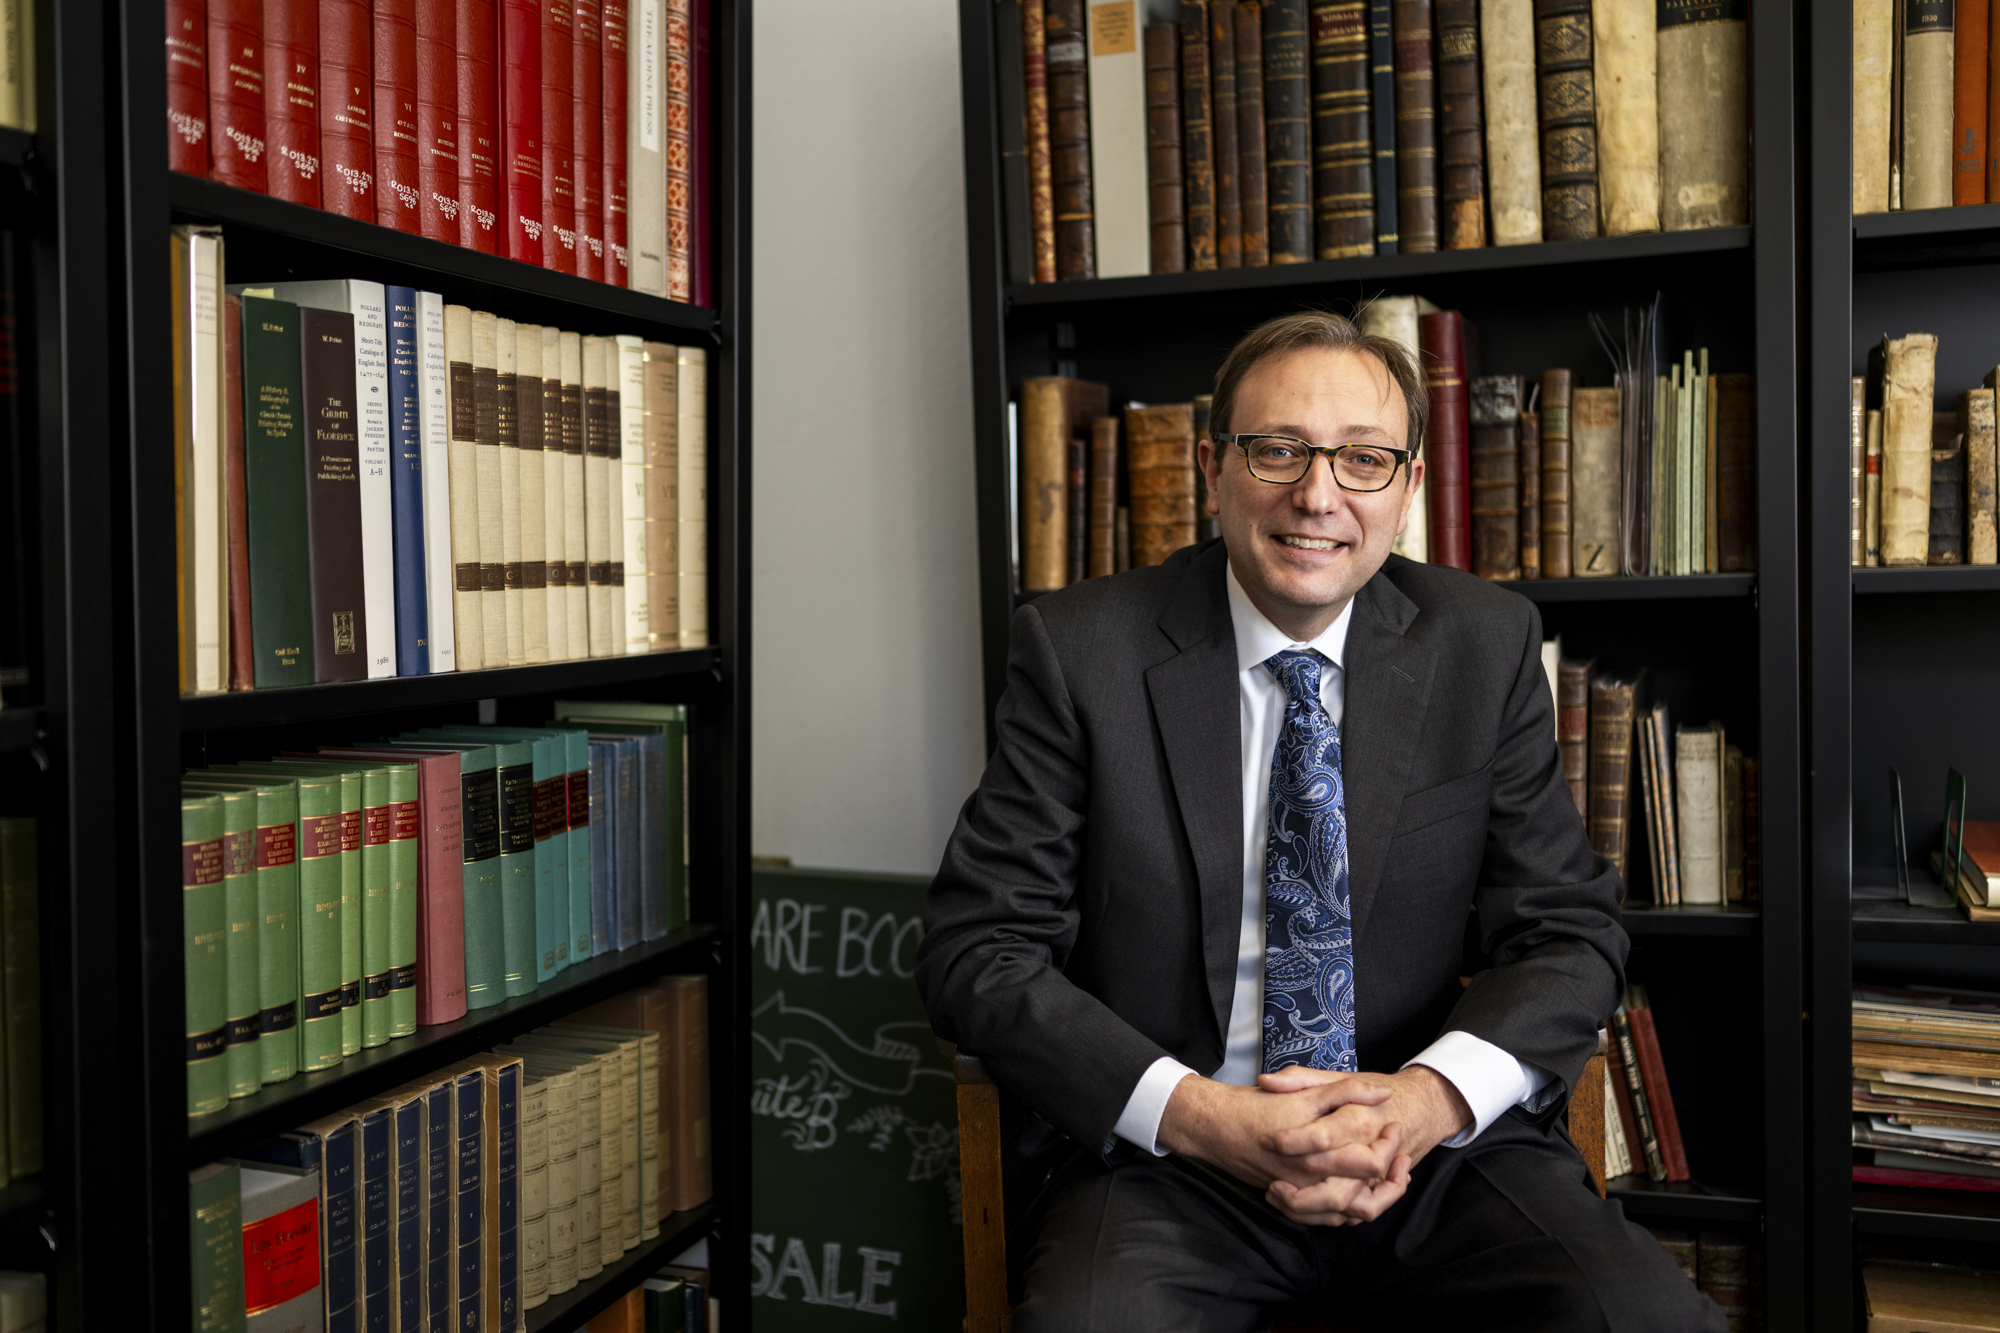 Person in suit with glasses smiles and sits in front of full bookshelves